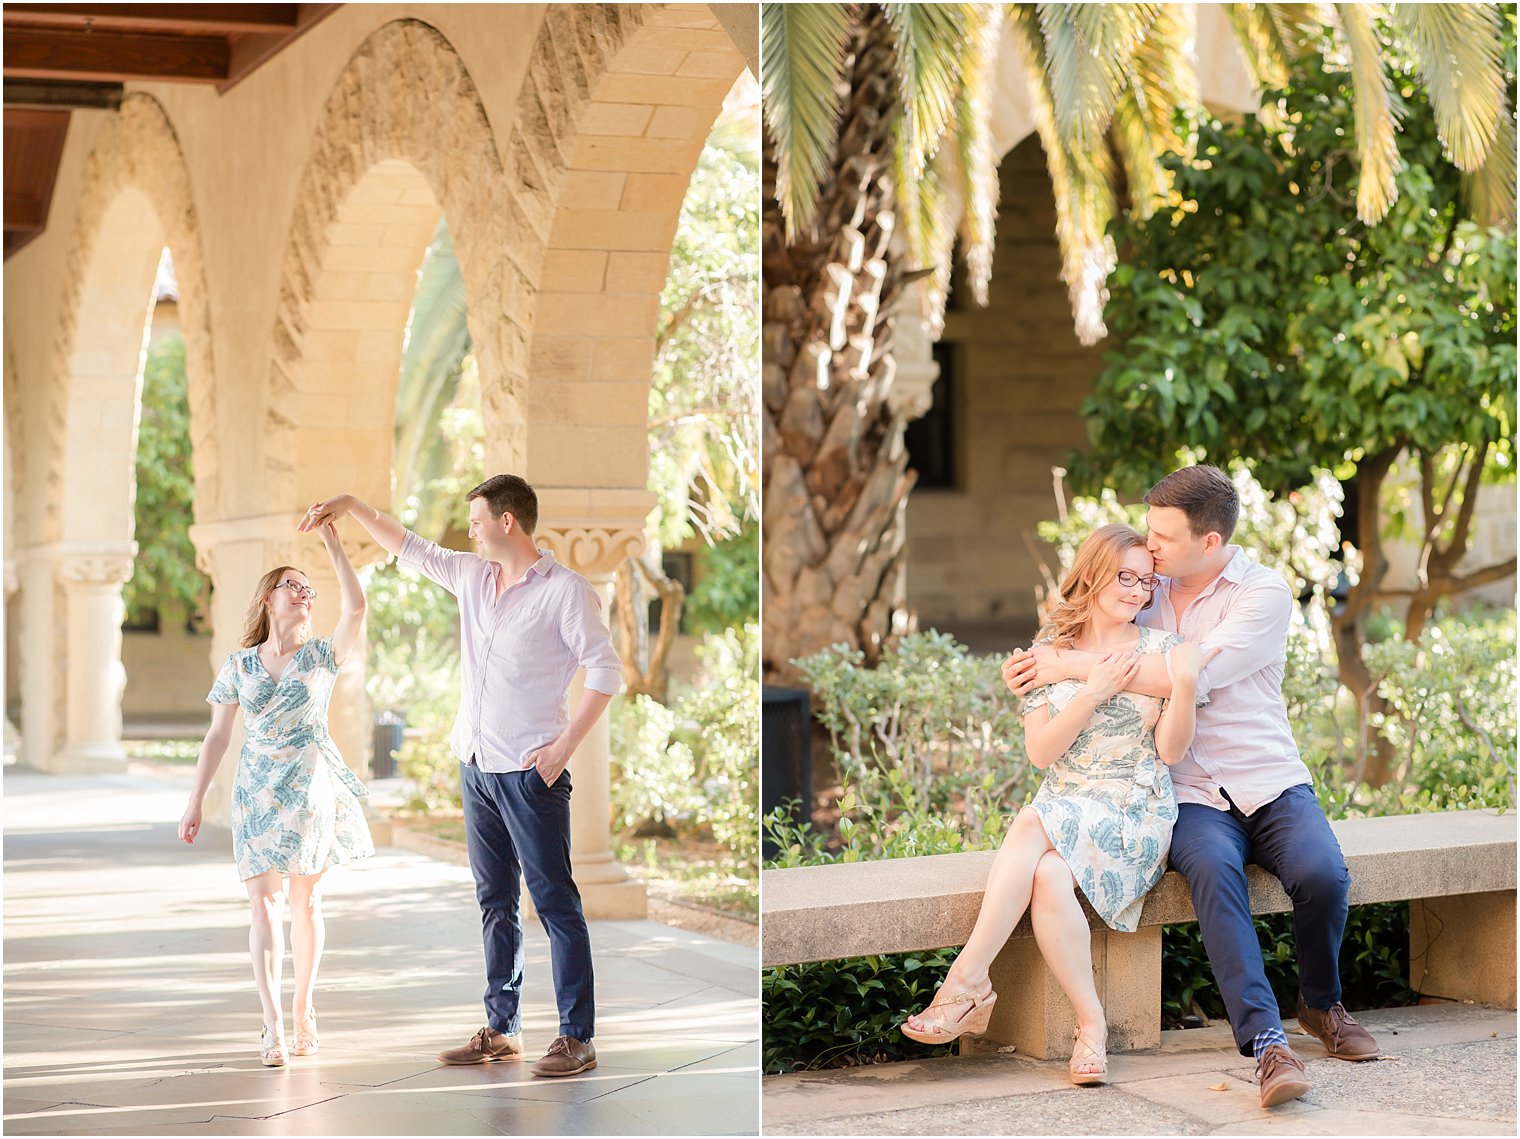 Romantic engagement photos of young couple at Stanford University